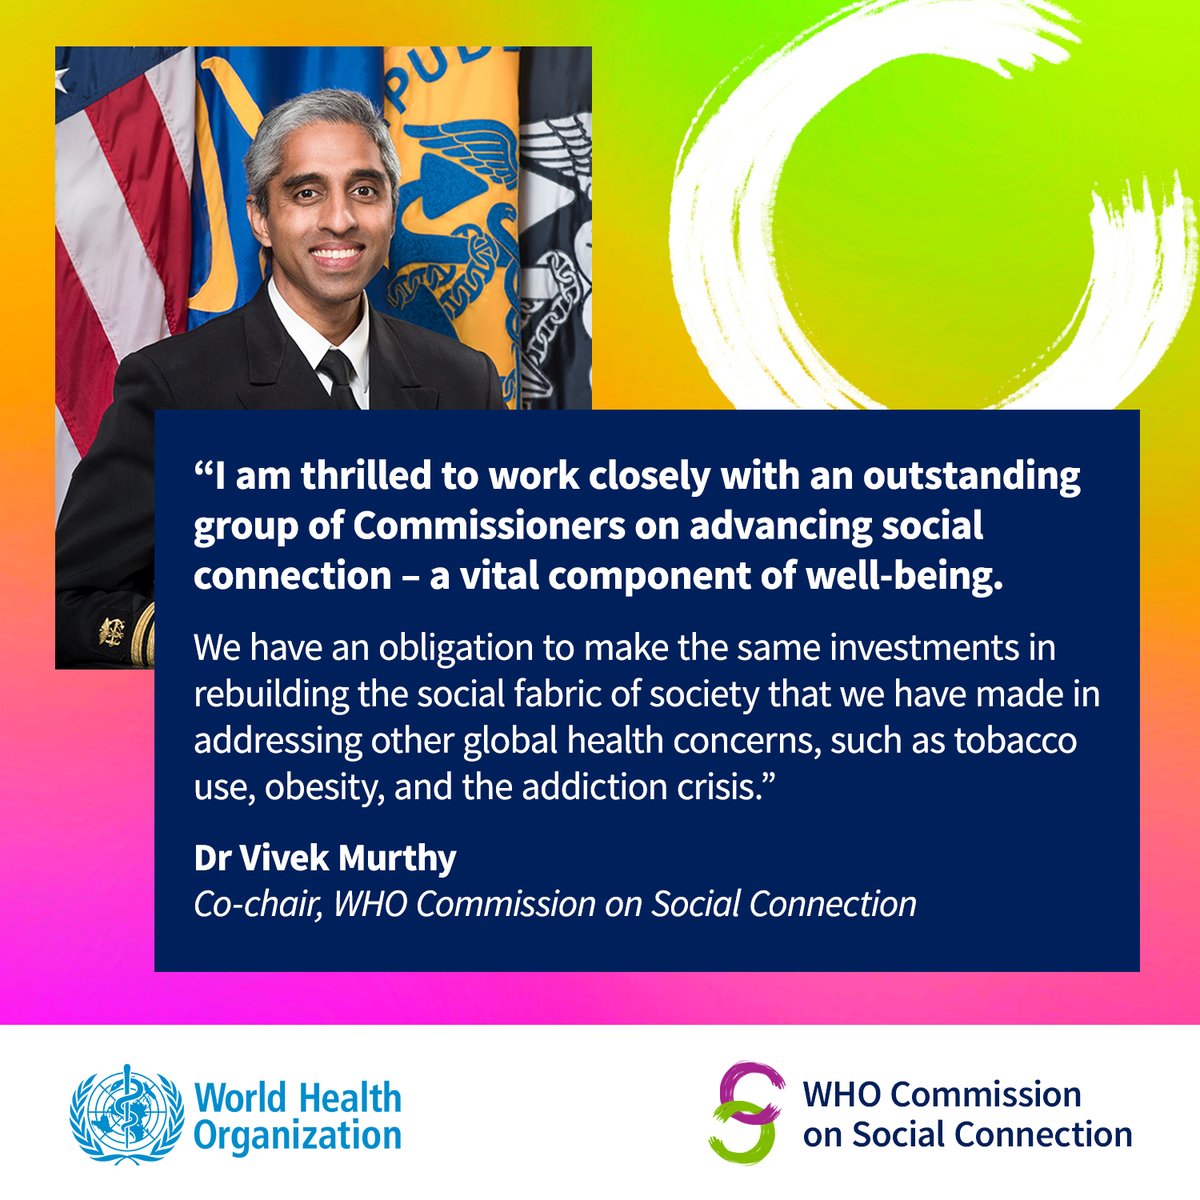 So glad @WHO is tackling social connection at a global level. Our connections to one another are vital to our health and well-being. I’m looking forward to the work ahead. bit.ly/WHO-CSC